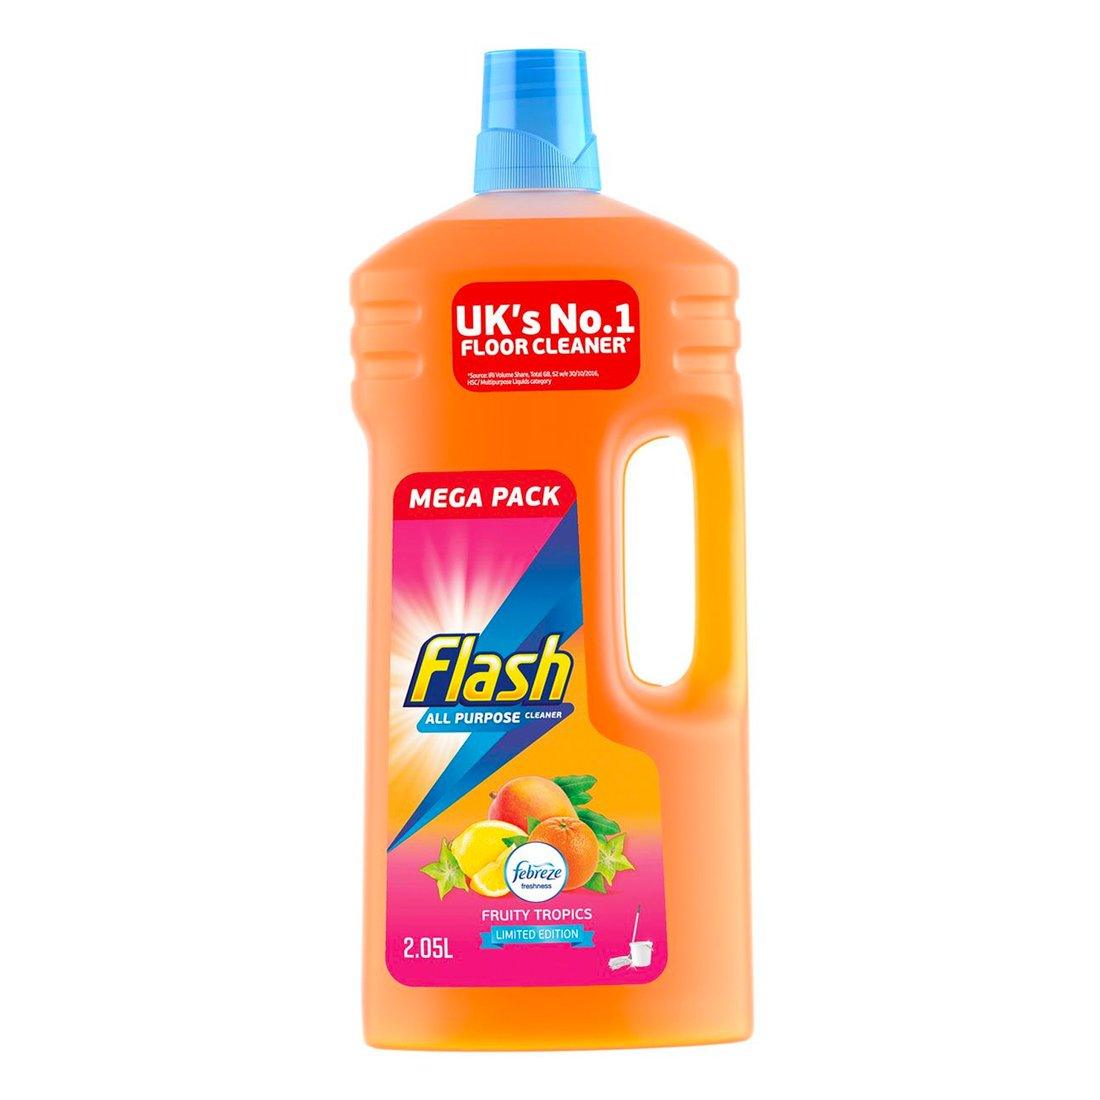 Flash All Purpose Cleaner Fruity Tropics 2.05L - Vending Superstore